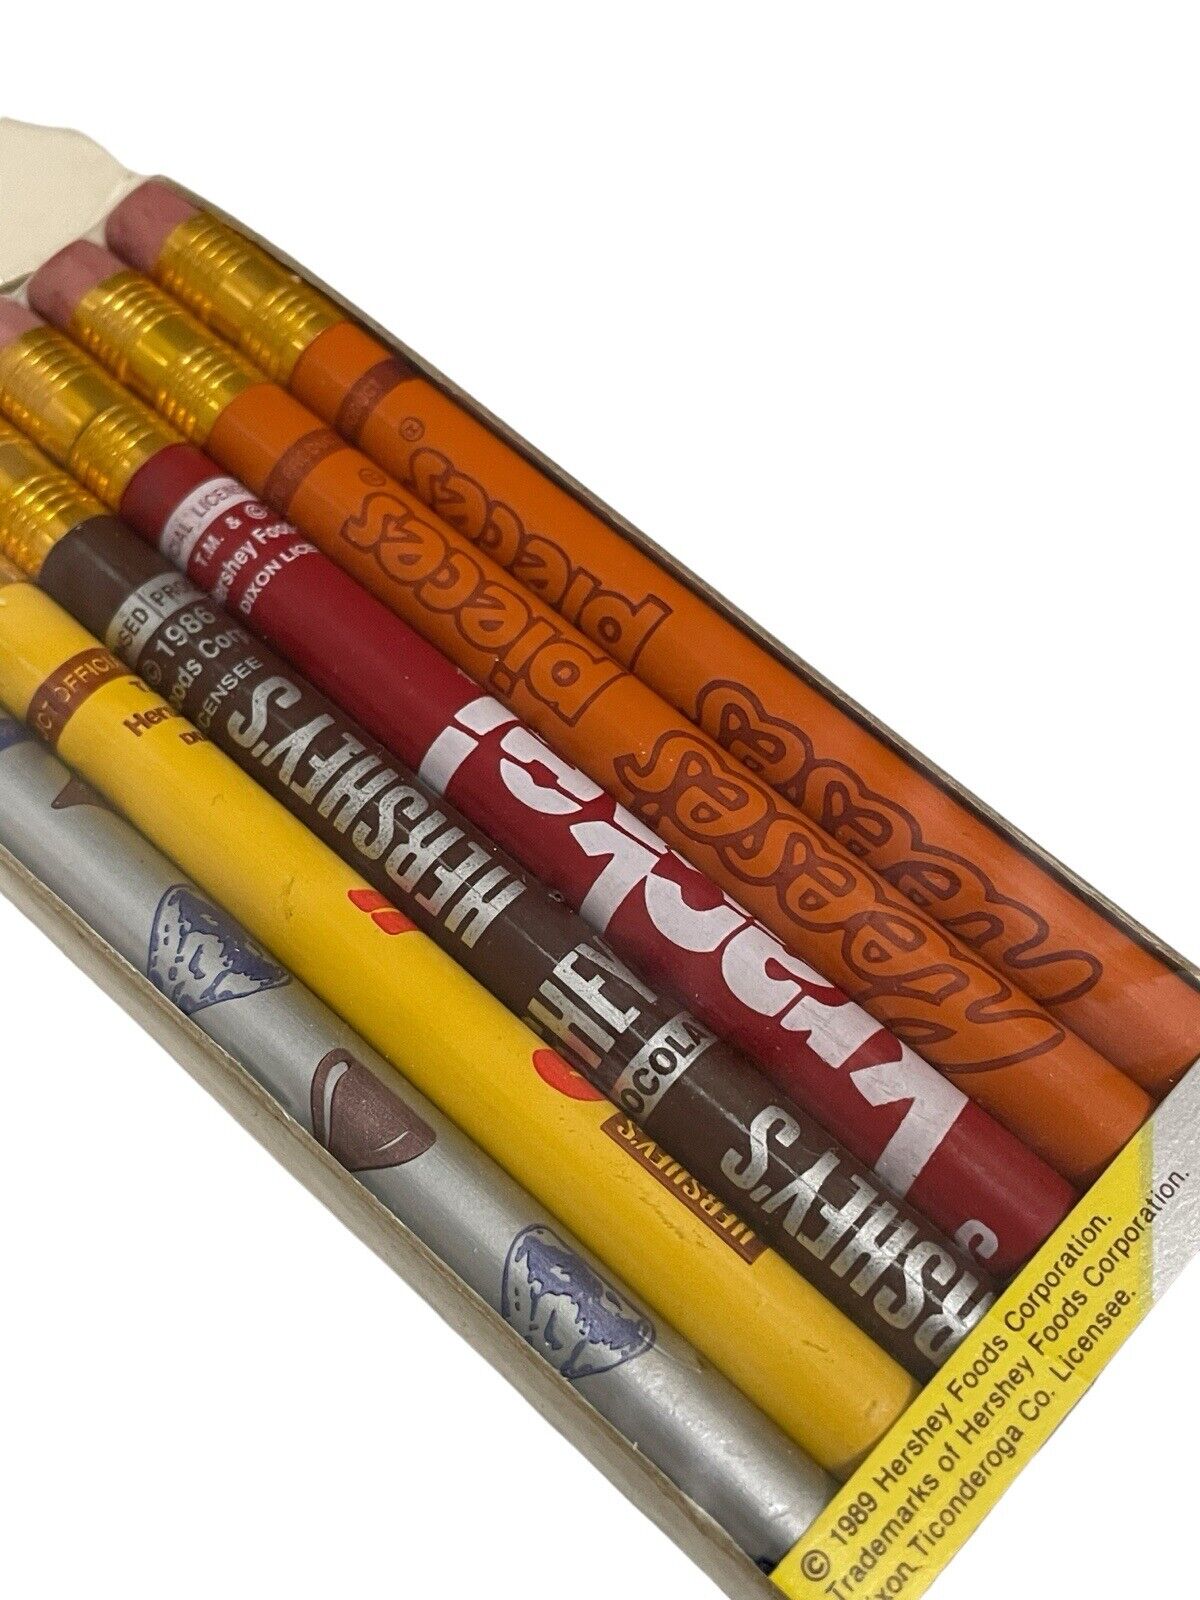 NOS VTG Hershey’s Pencils Advertising Chocolate Candy Bar Scented 1989 6x No. 2